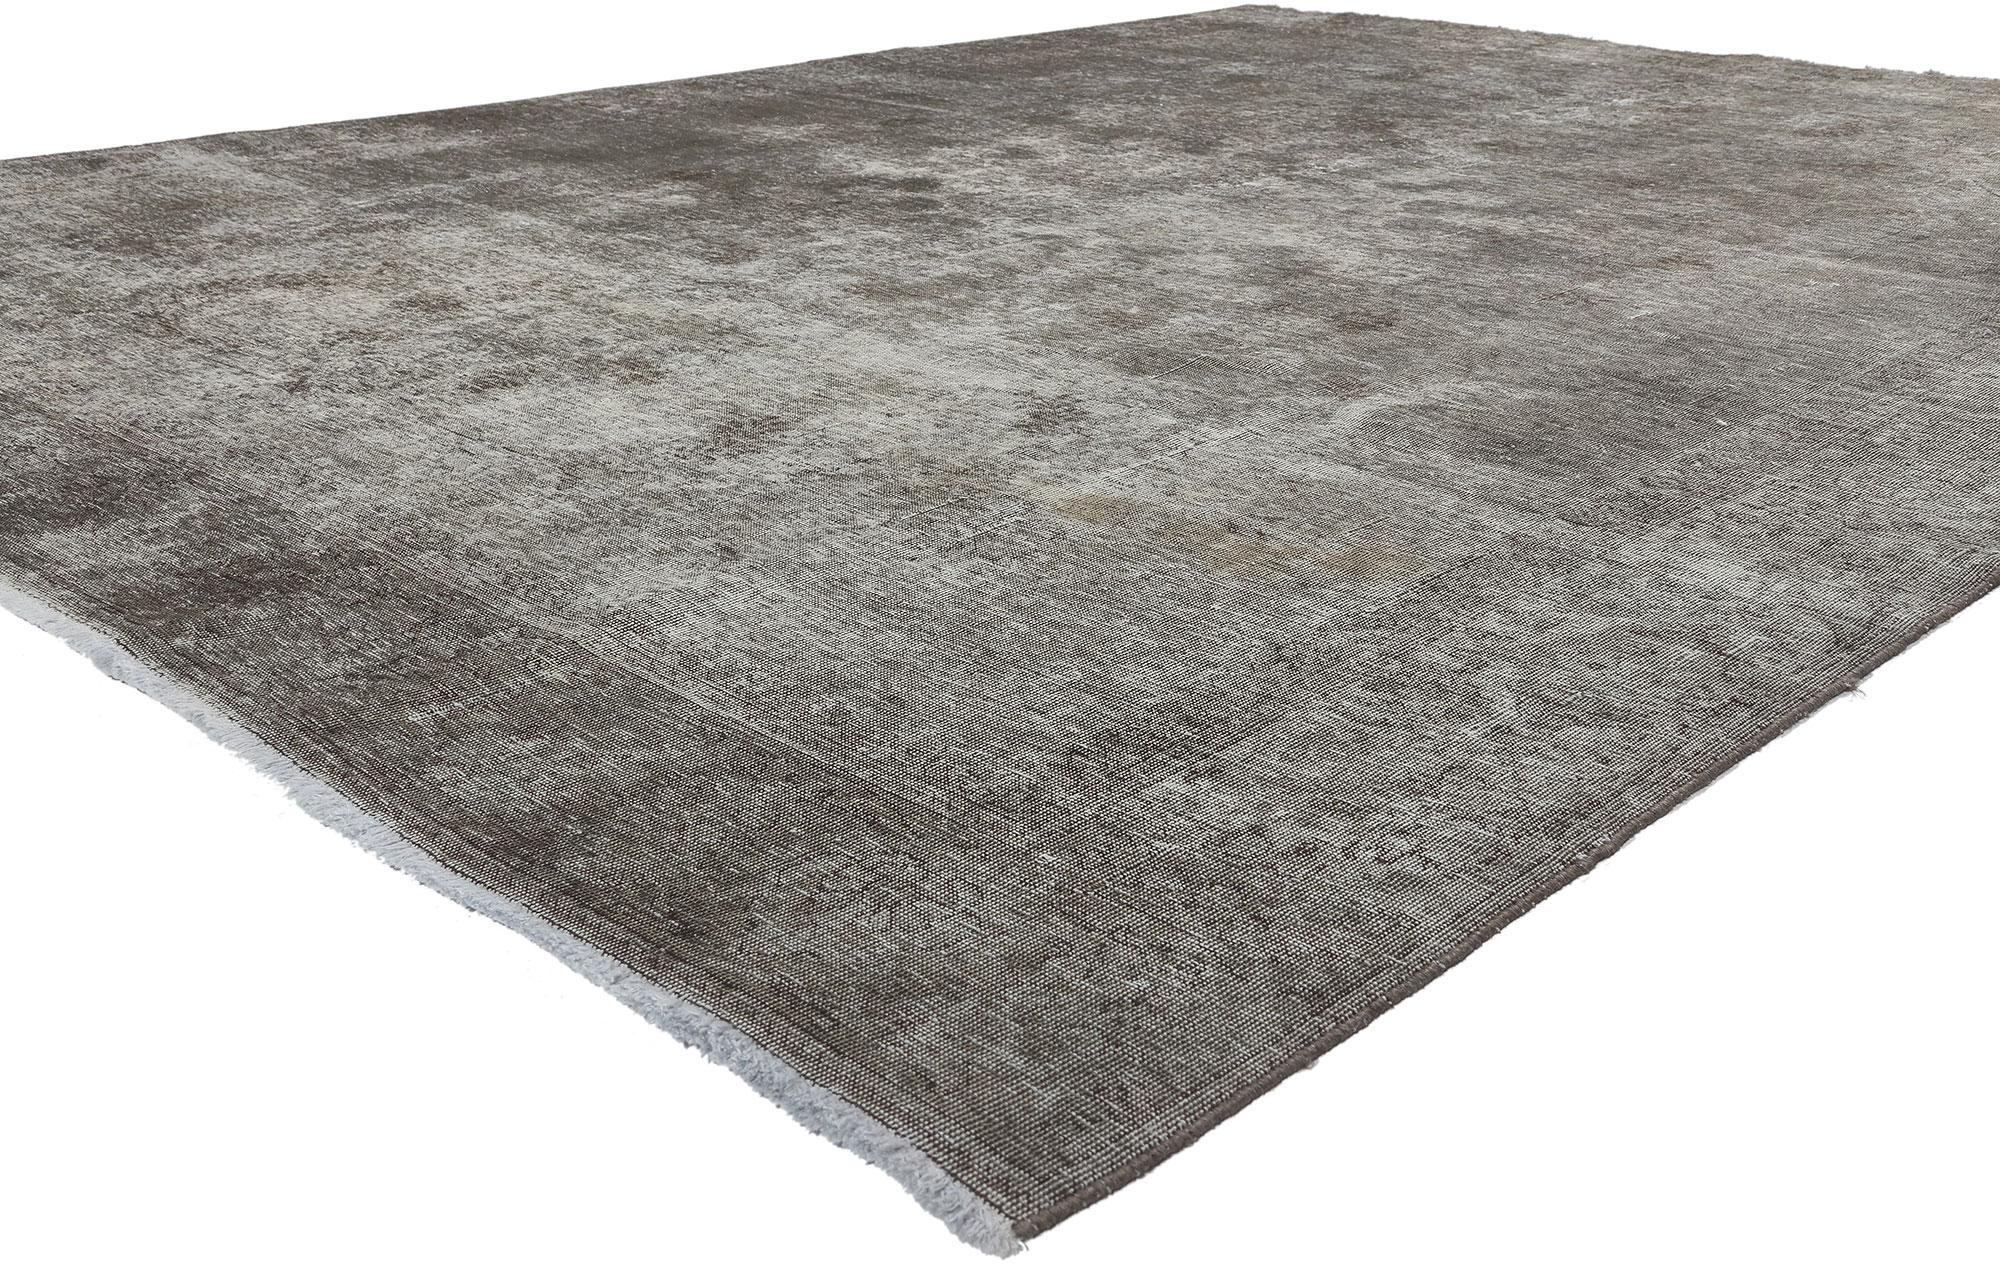 Vintage Persian Earth-Tone Overdyed Rug with Modern Luxe Industrial Loft Style For Sale 3